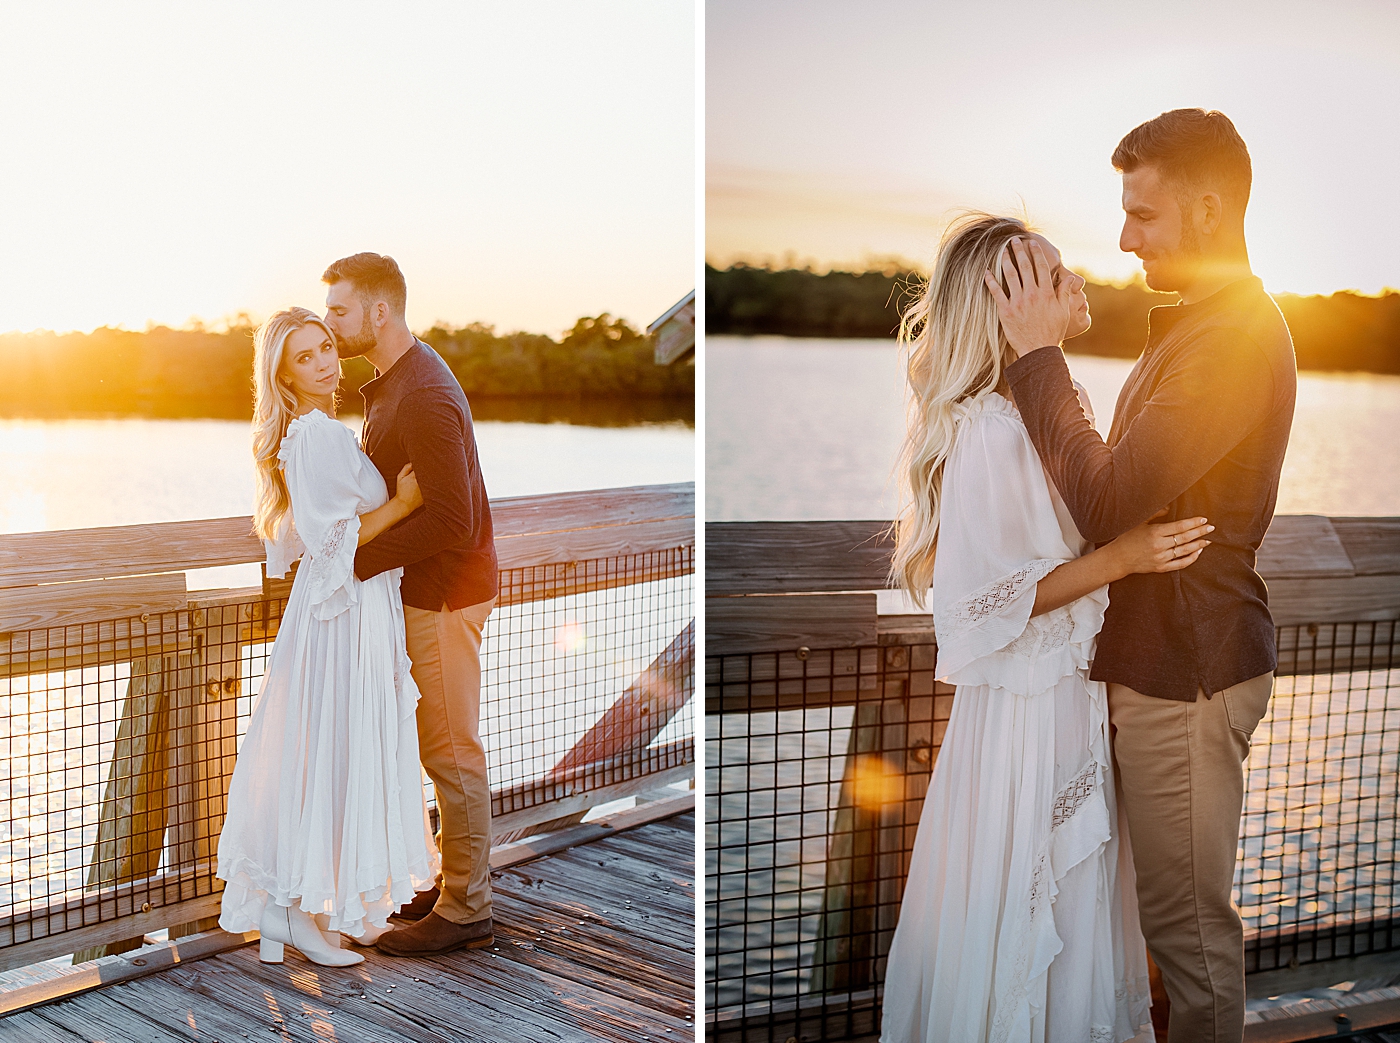 Man kisses woman on side of head on wood bridge with the sun setting Jupiter Engagement Photography captured by South Florida Engagement Photographer Erika Tuesta Photography